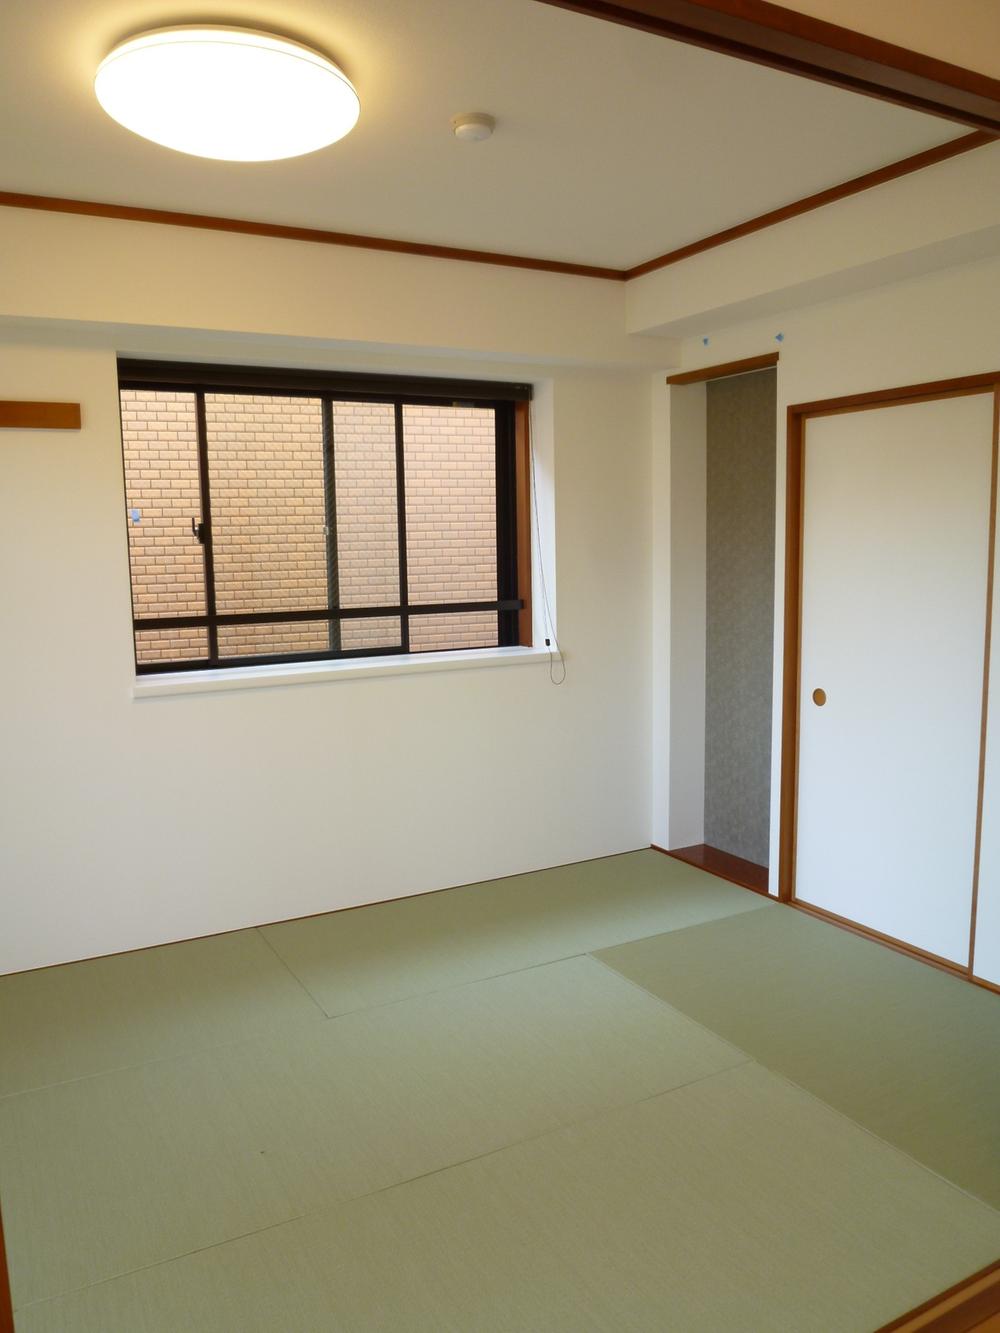 Non-living room. Relaxing Japanese-style room